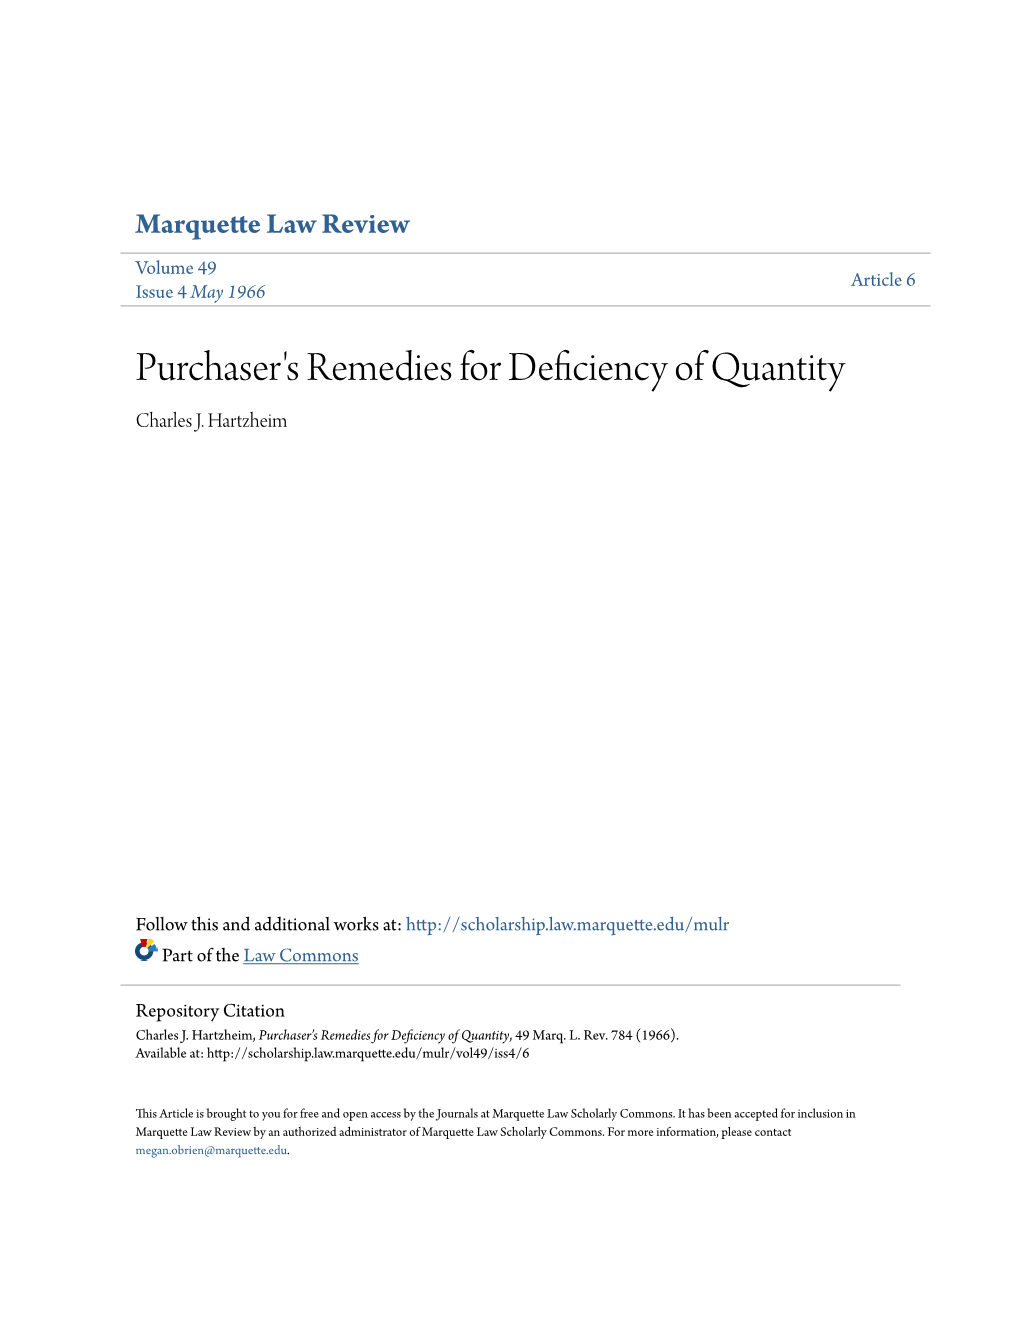 Purchaser's Remedies for Deficiency of Quantity Charles J